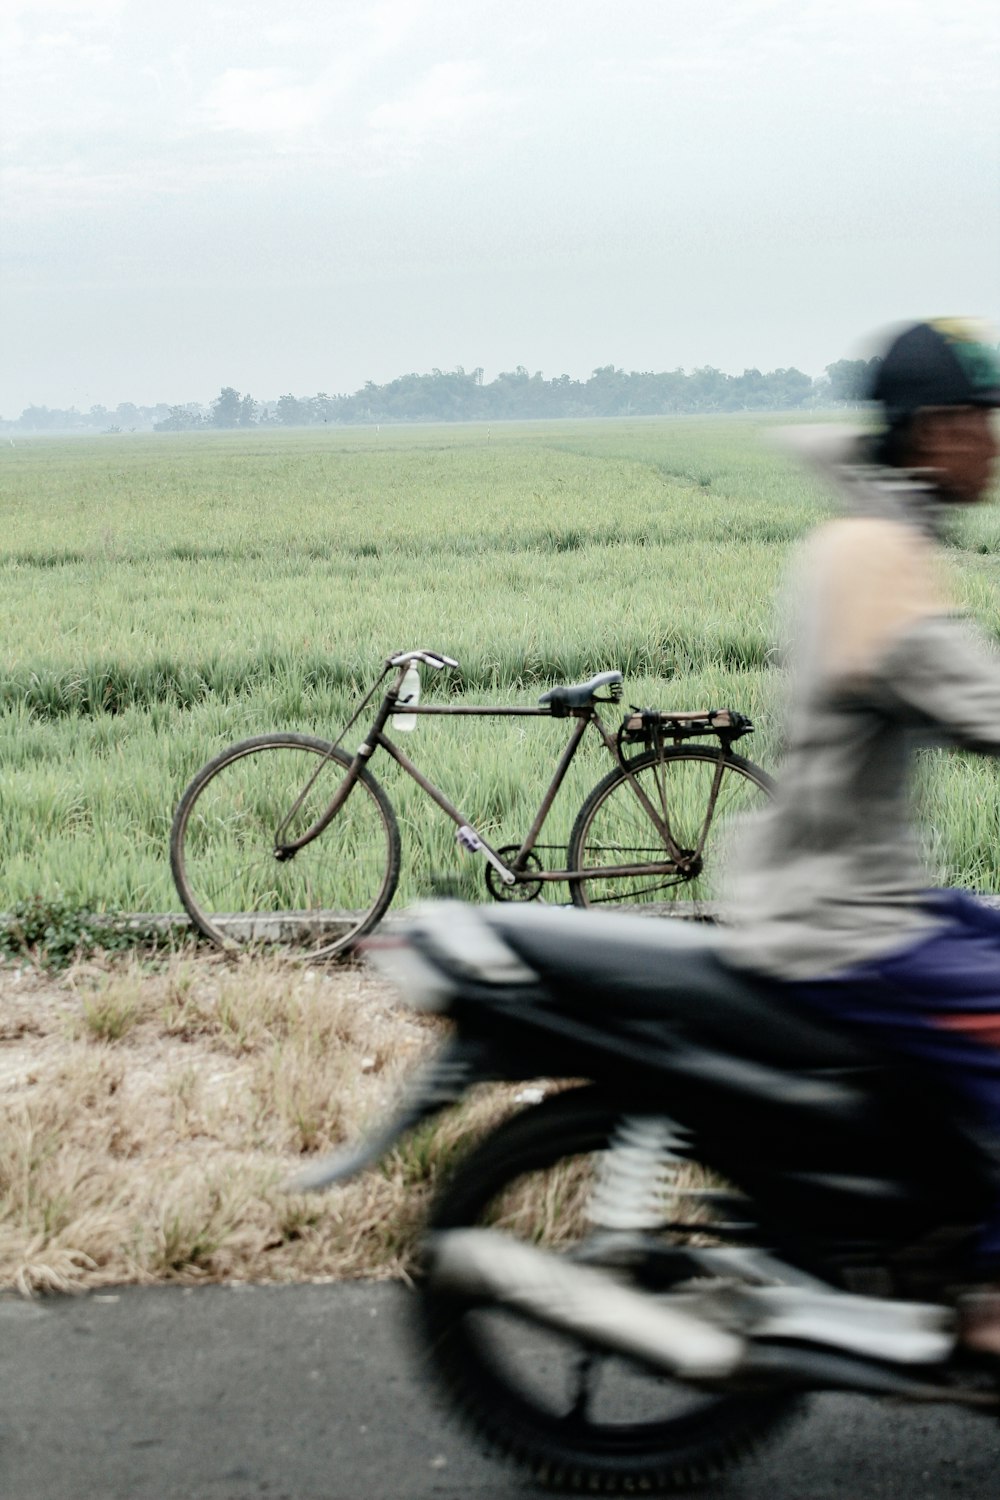 man in gray shirt riding on black bicycle on green grass field during daytime